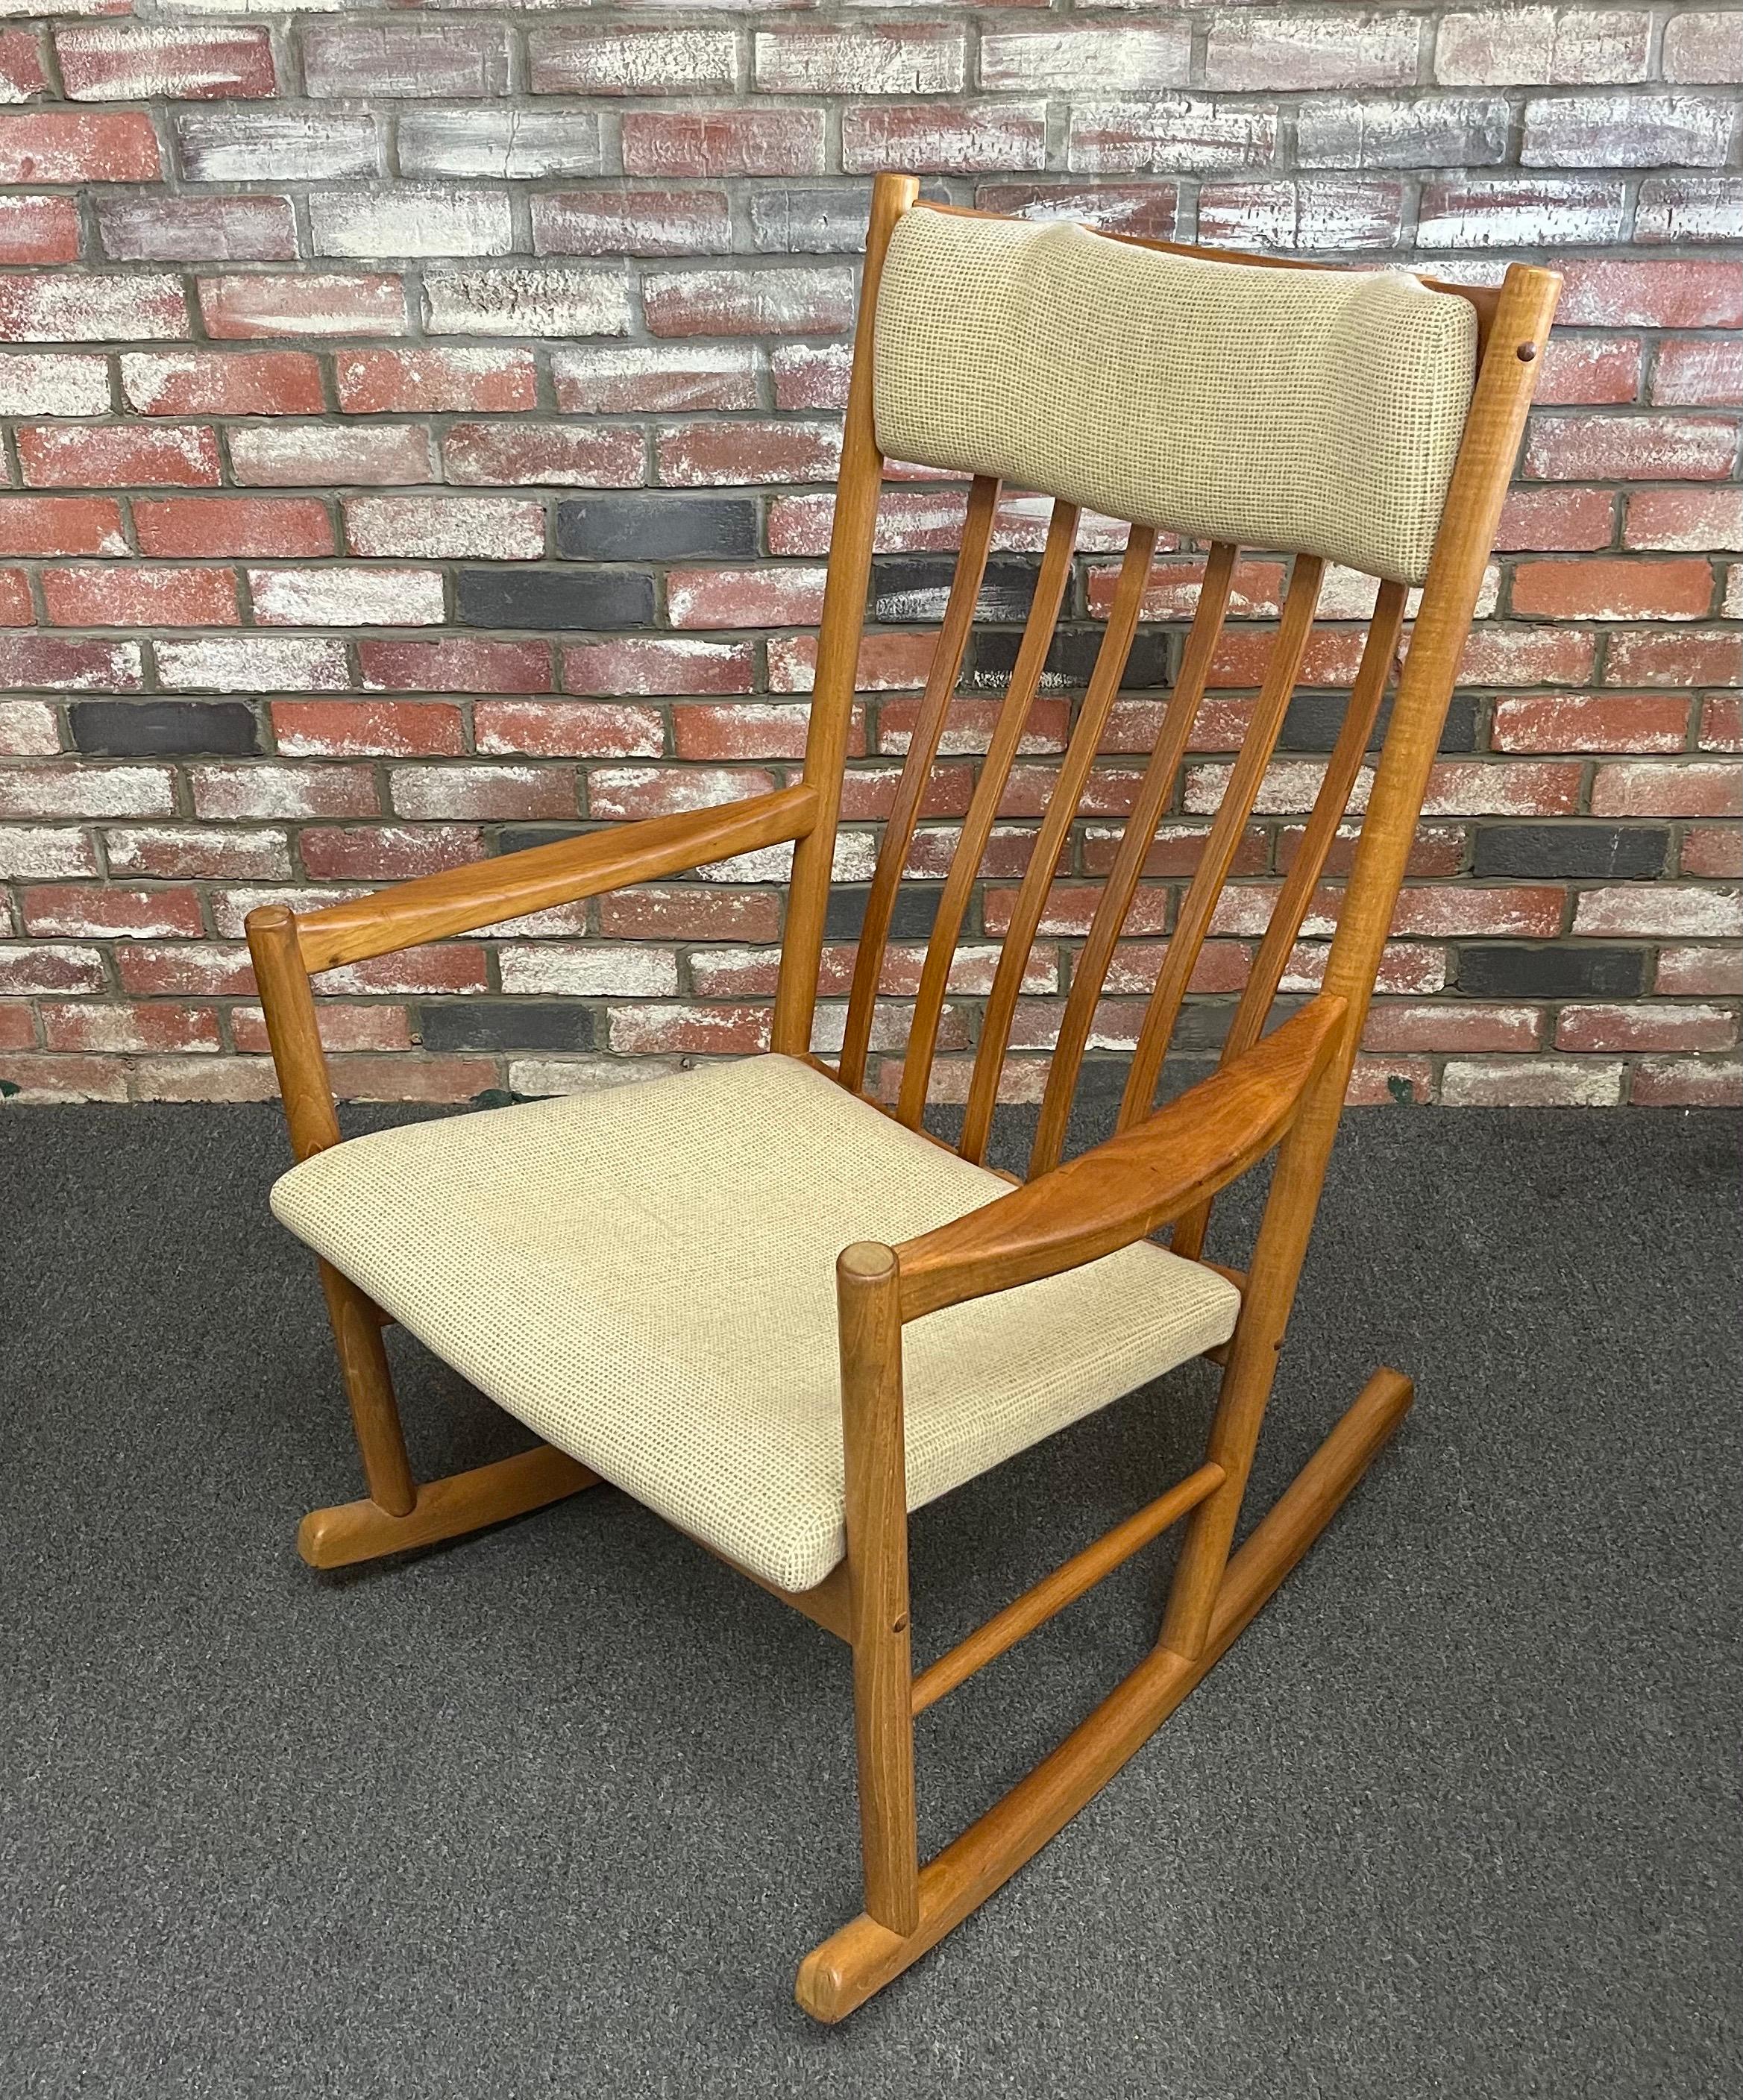 Danish Modern oversized teak rocking chair / rocker by Hans Wegner for Tarm Stole, circa 1970s This chair is even more impressive in person. The large proportions of this design make a statement but it does not overwhelm the room. The beautiful warm